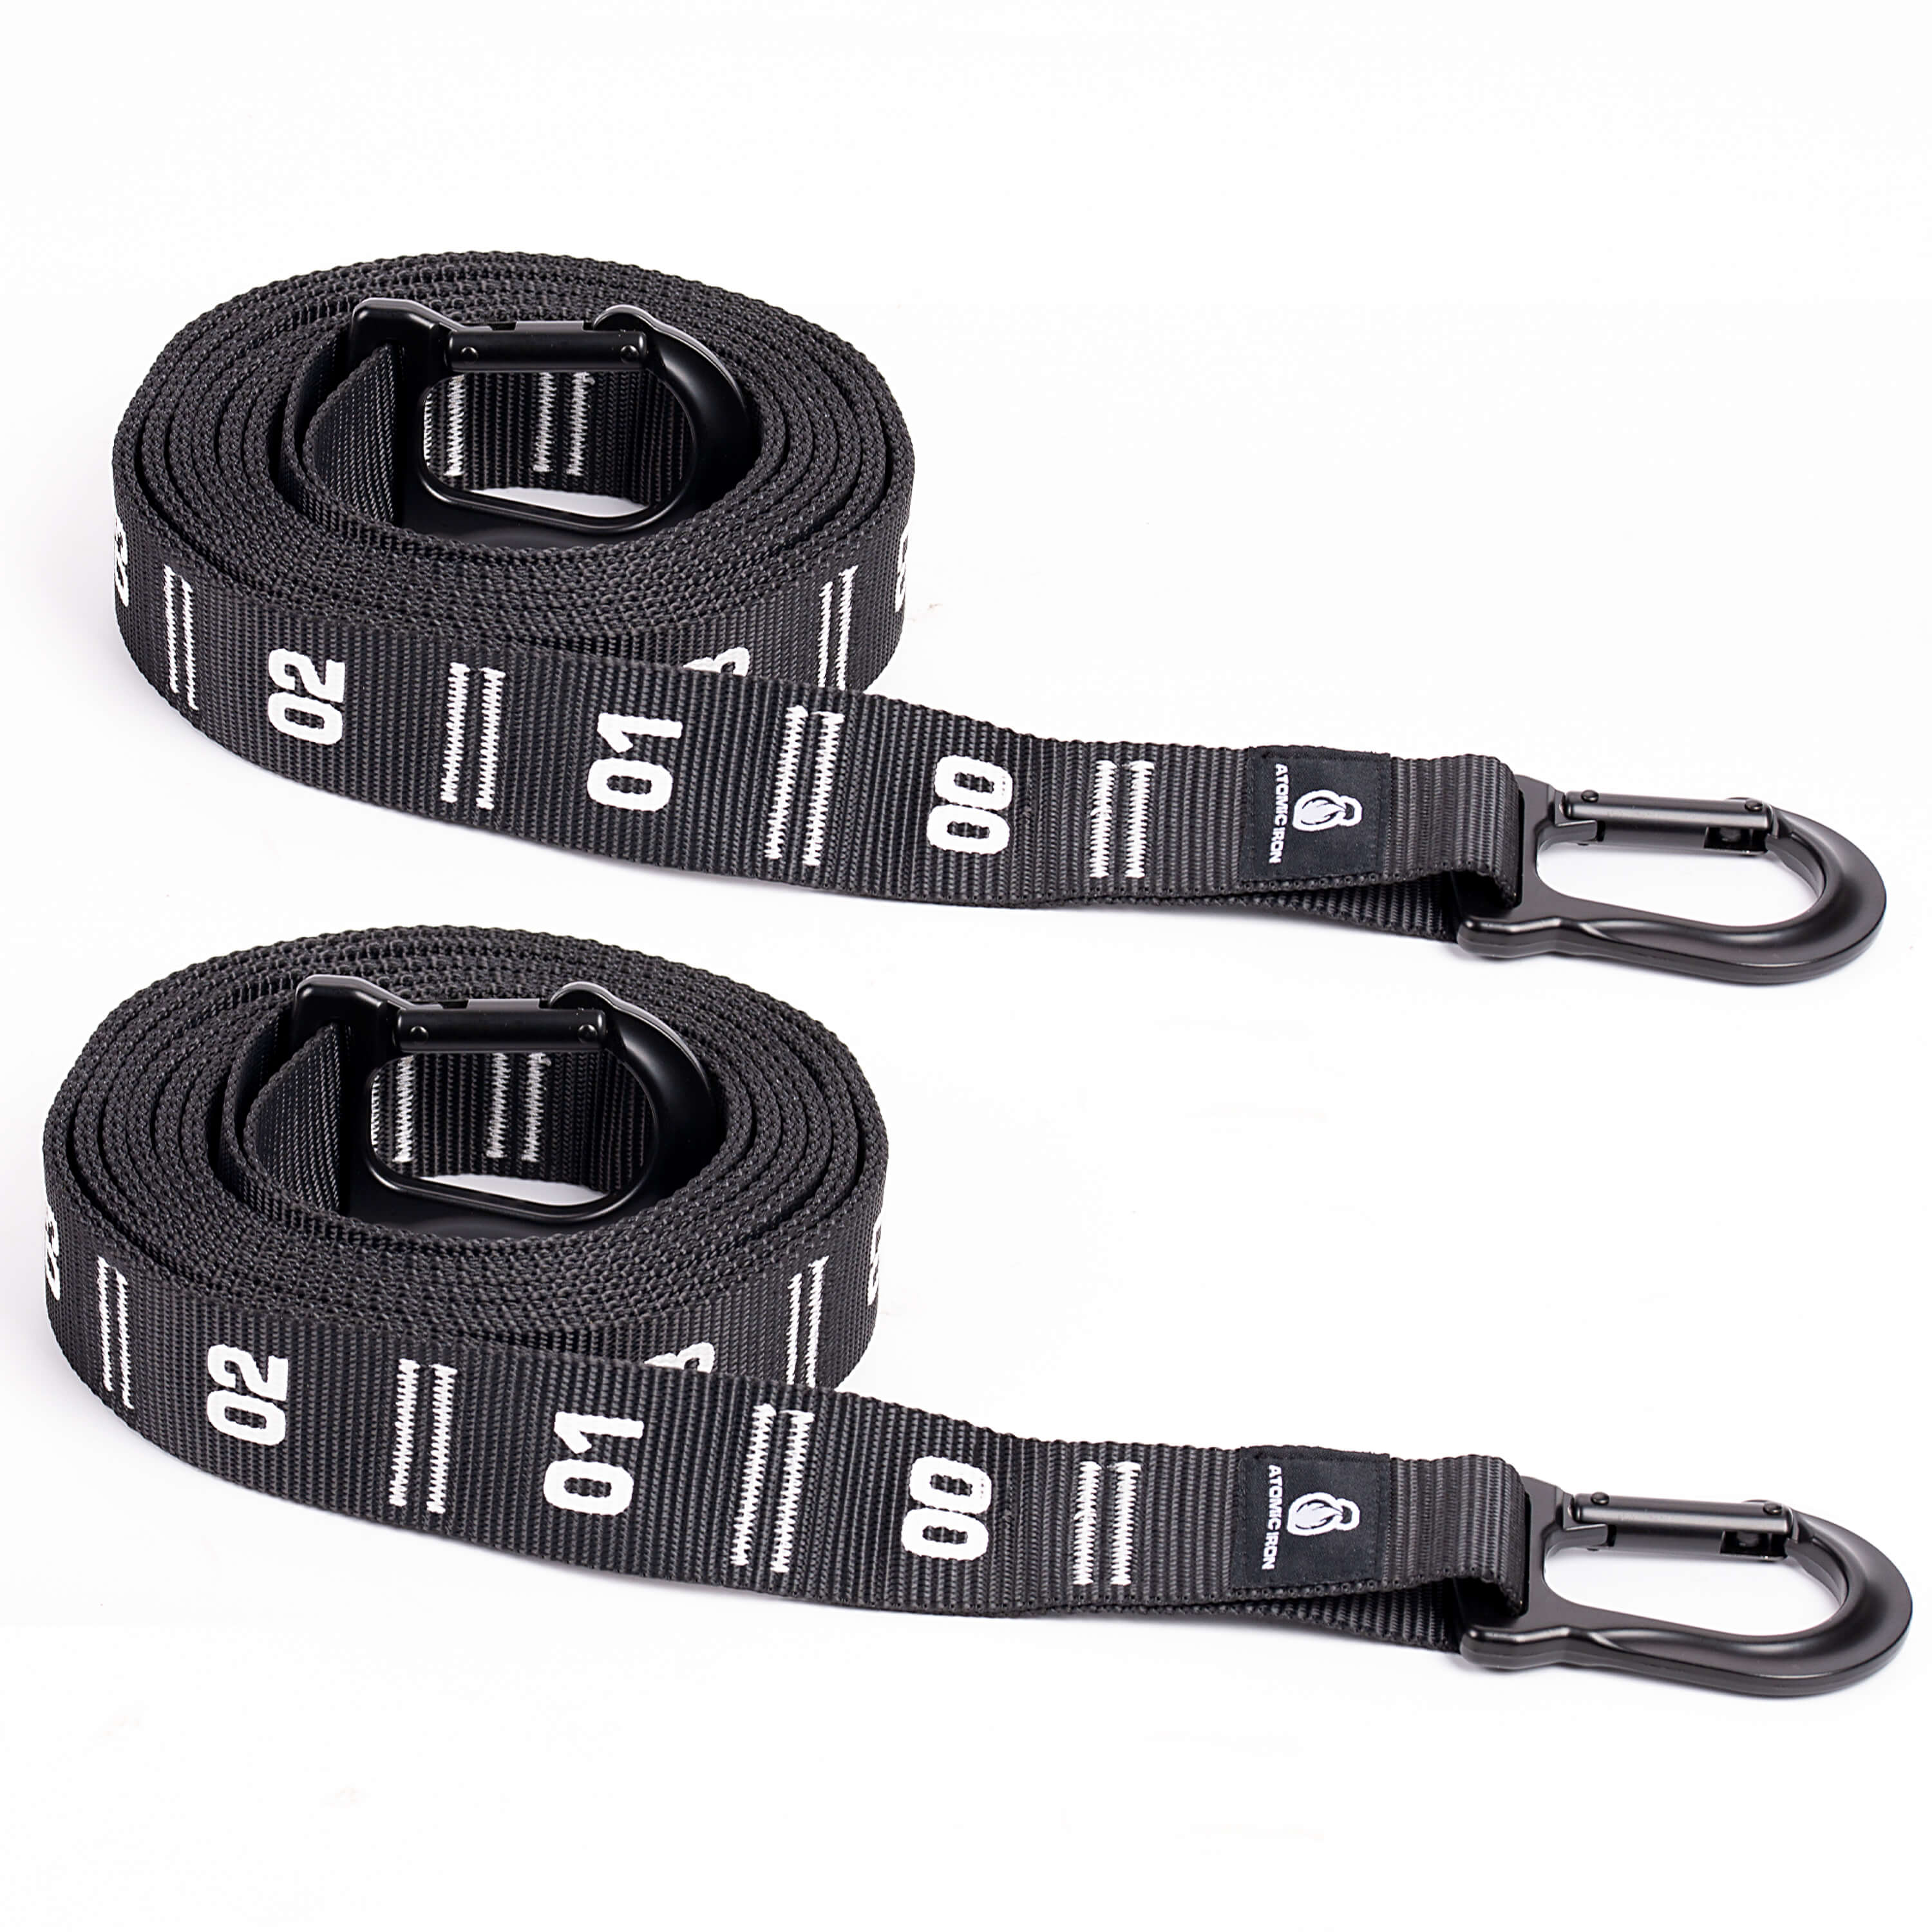 Numbered carabiner straps for gymnastic rings by Atomic Iron